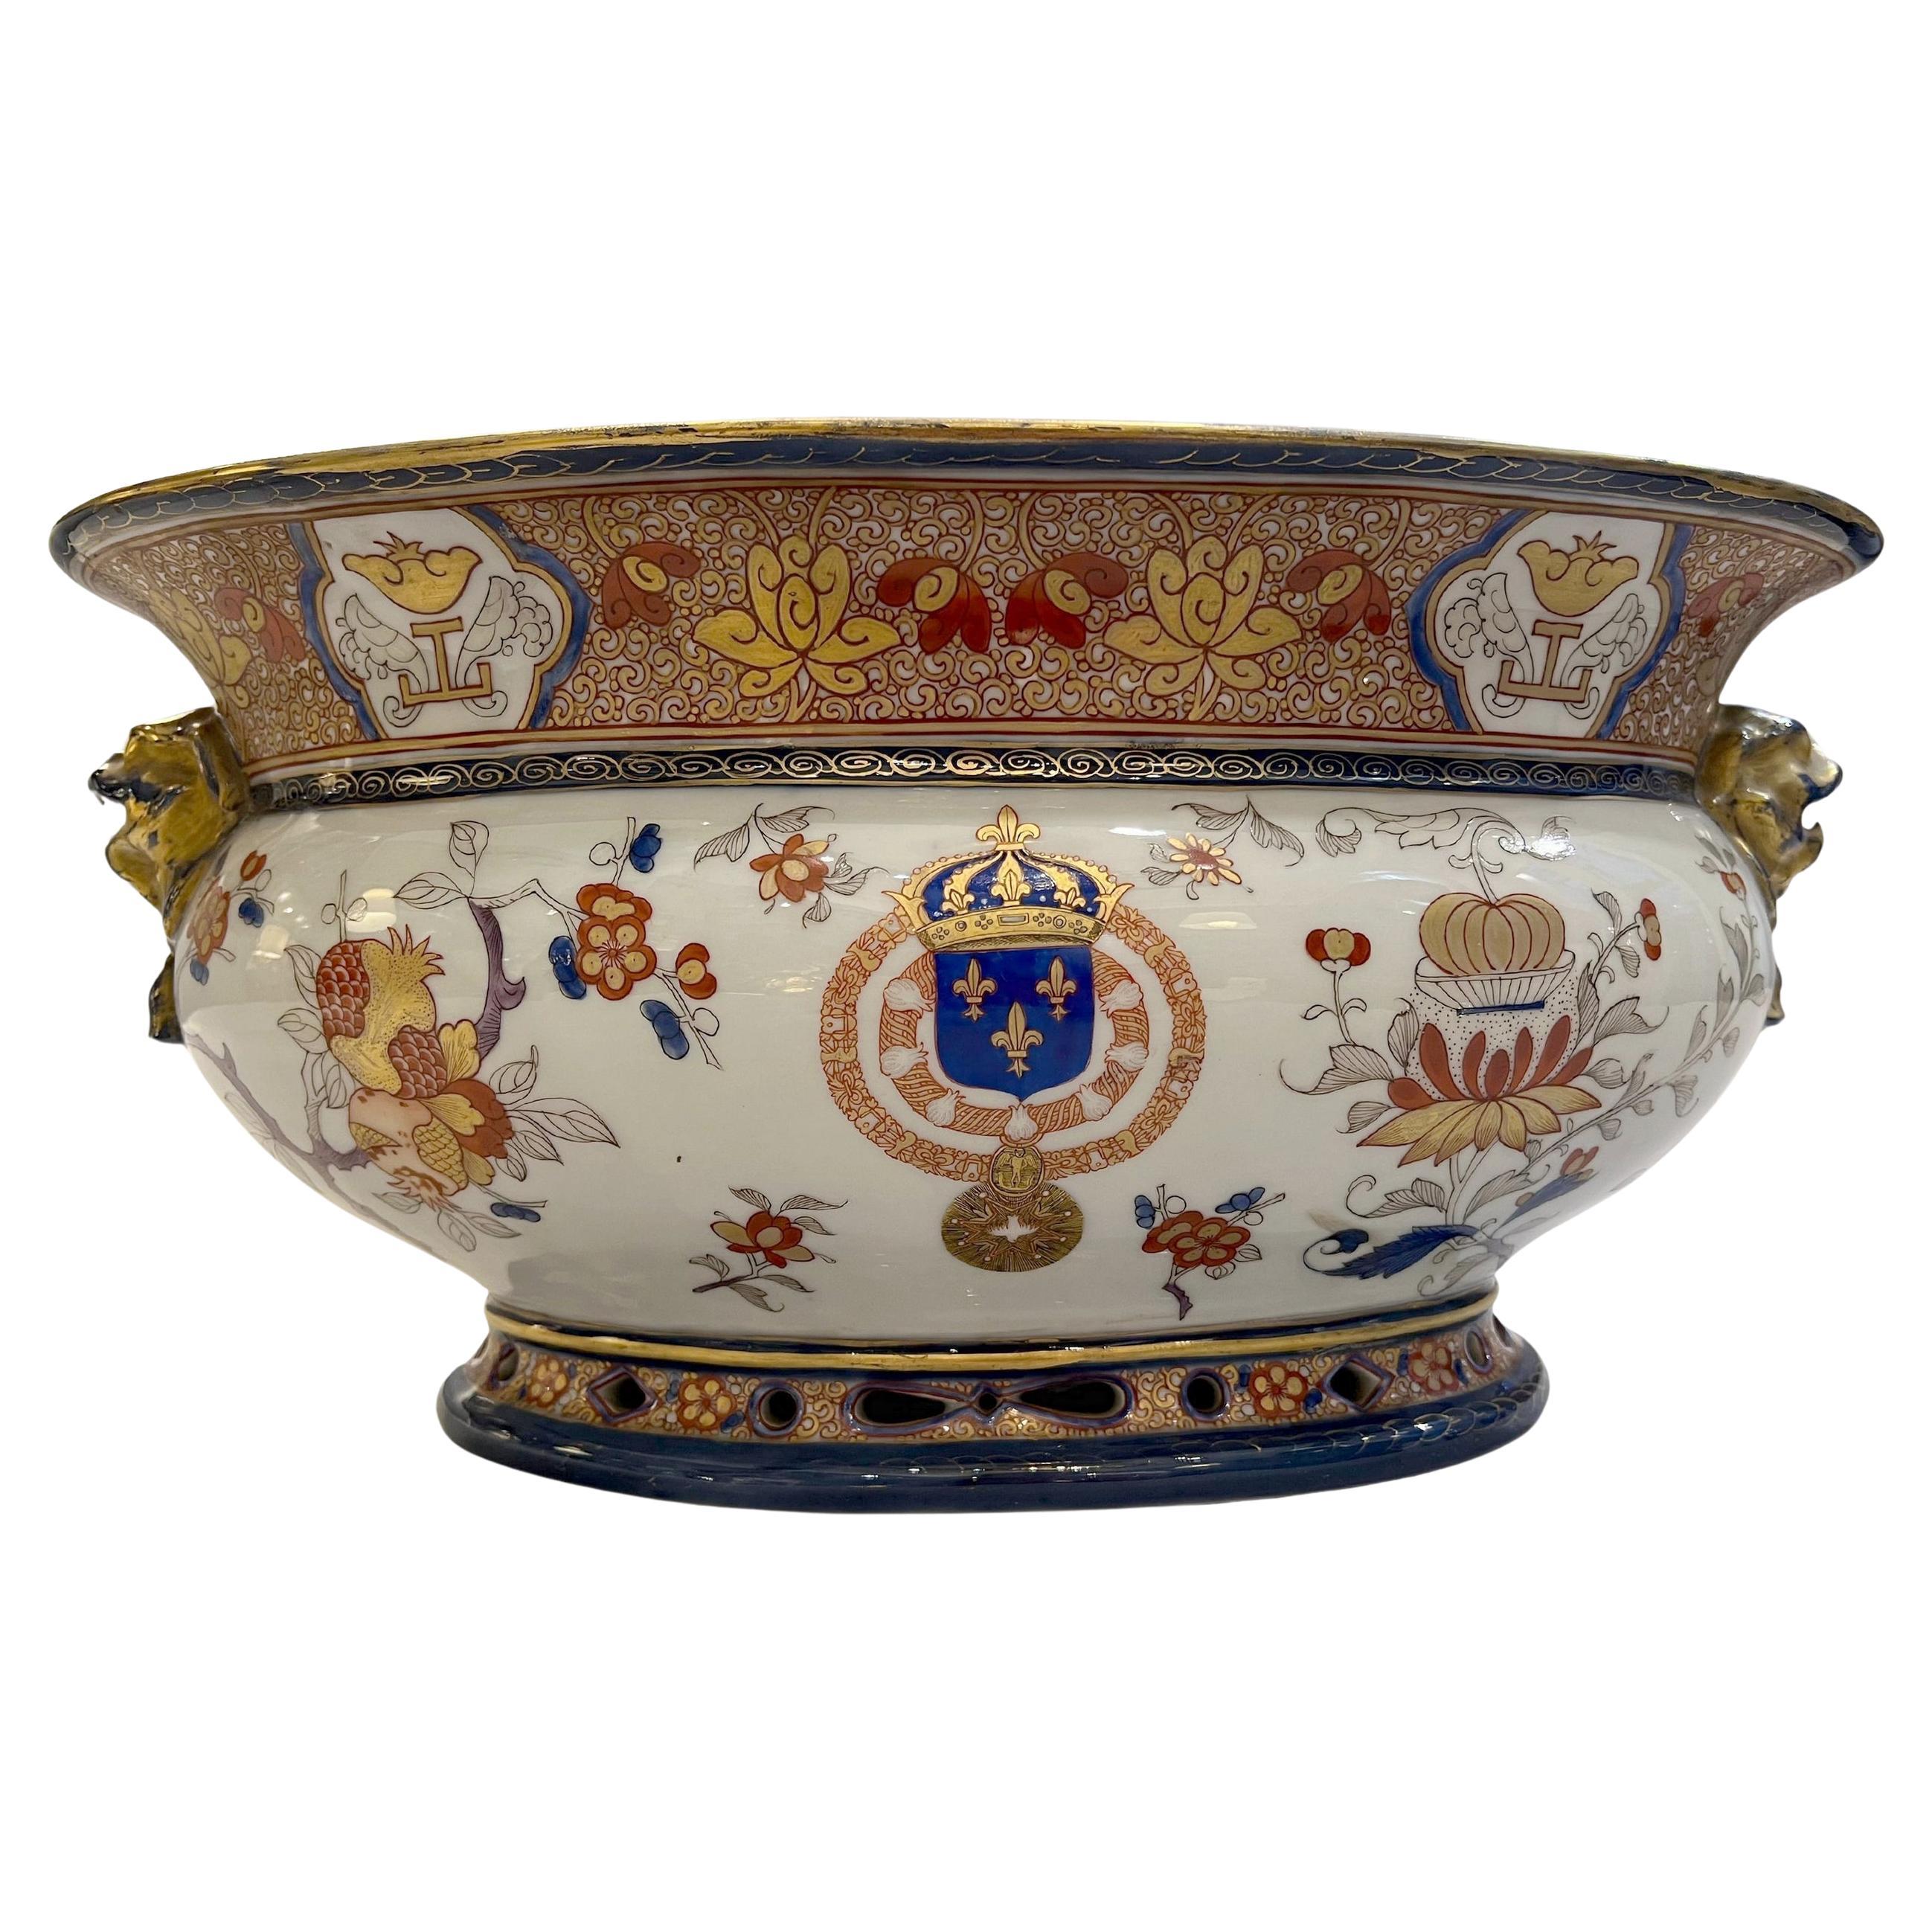 Jardiniere with the royal coat of arms of France, Paris, France circa 1880